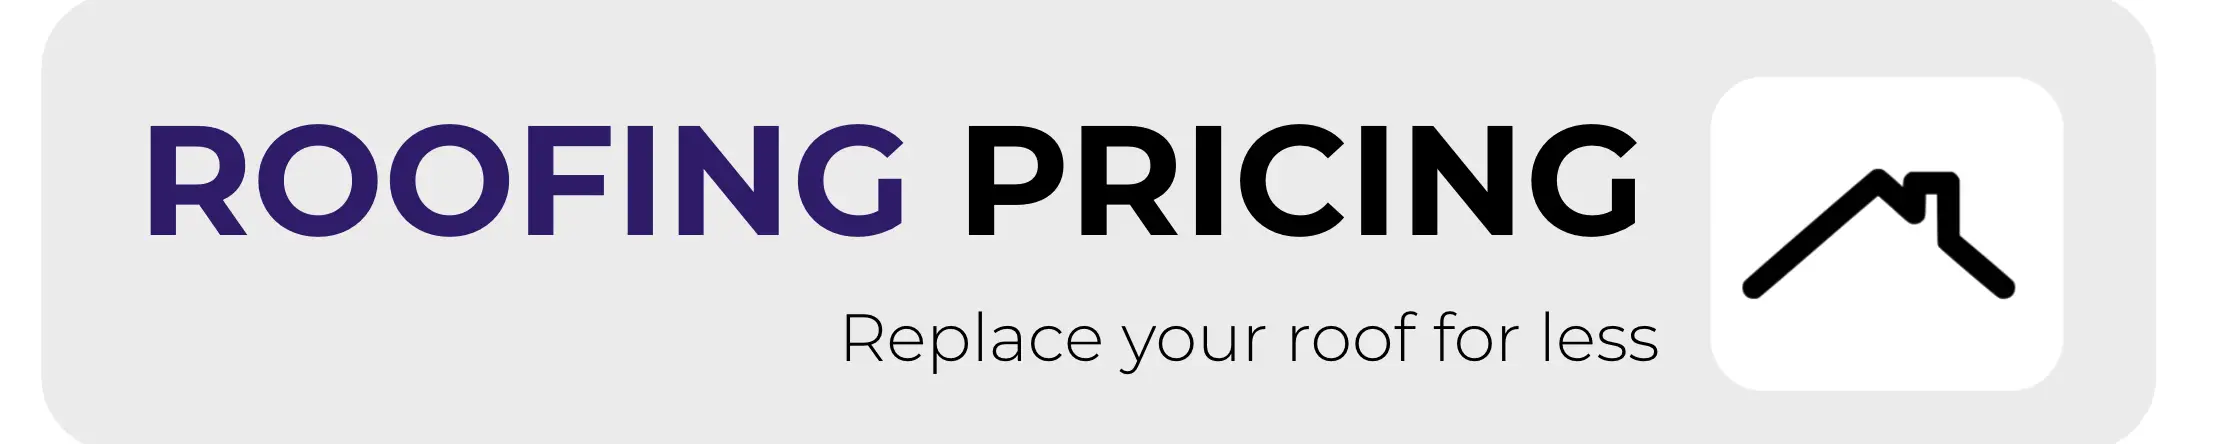 Roofingpricing.com